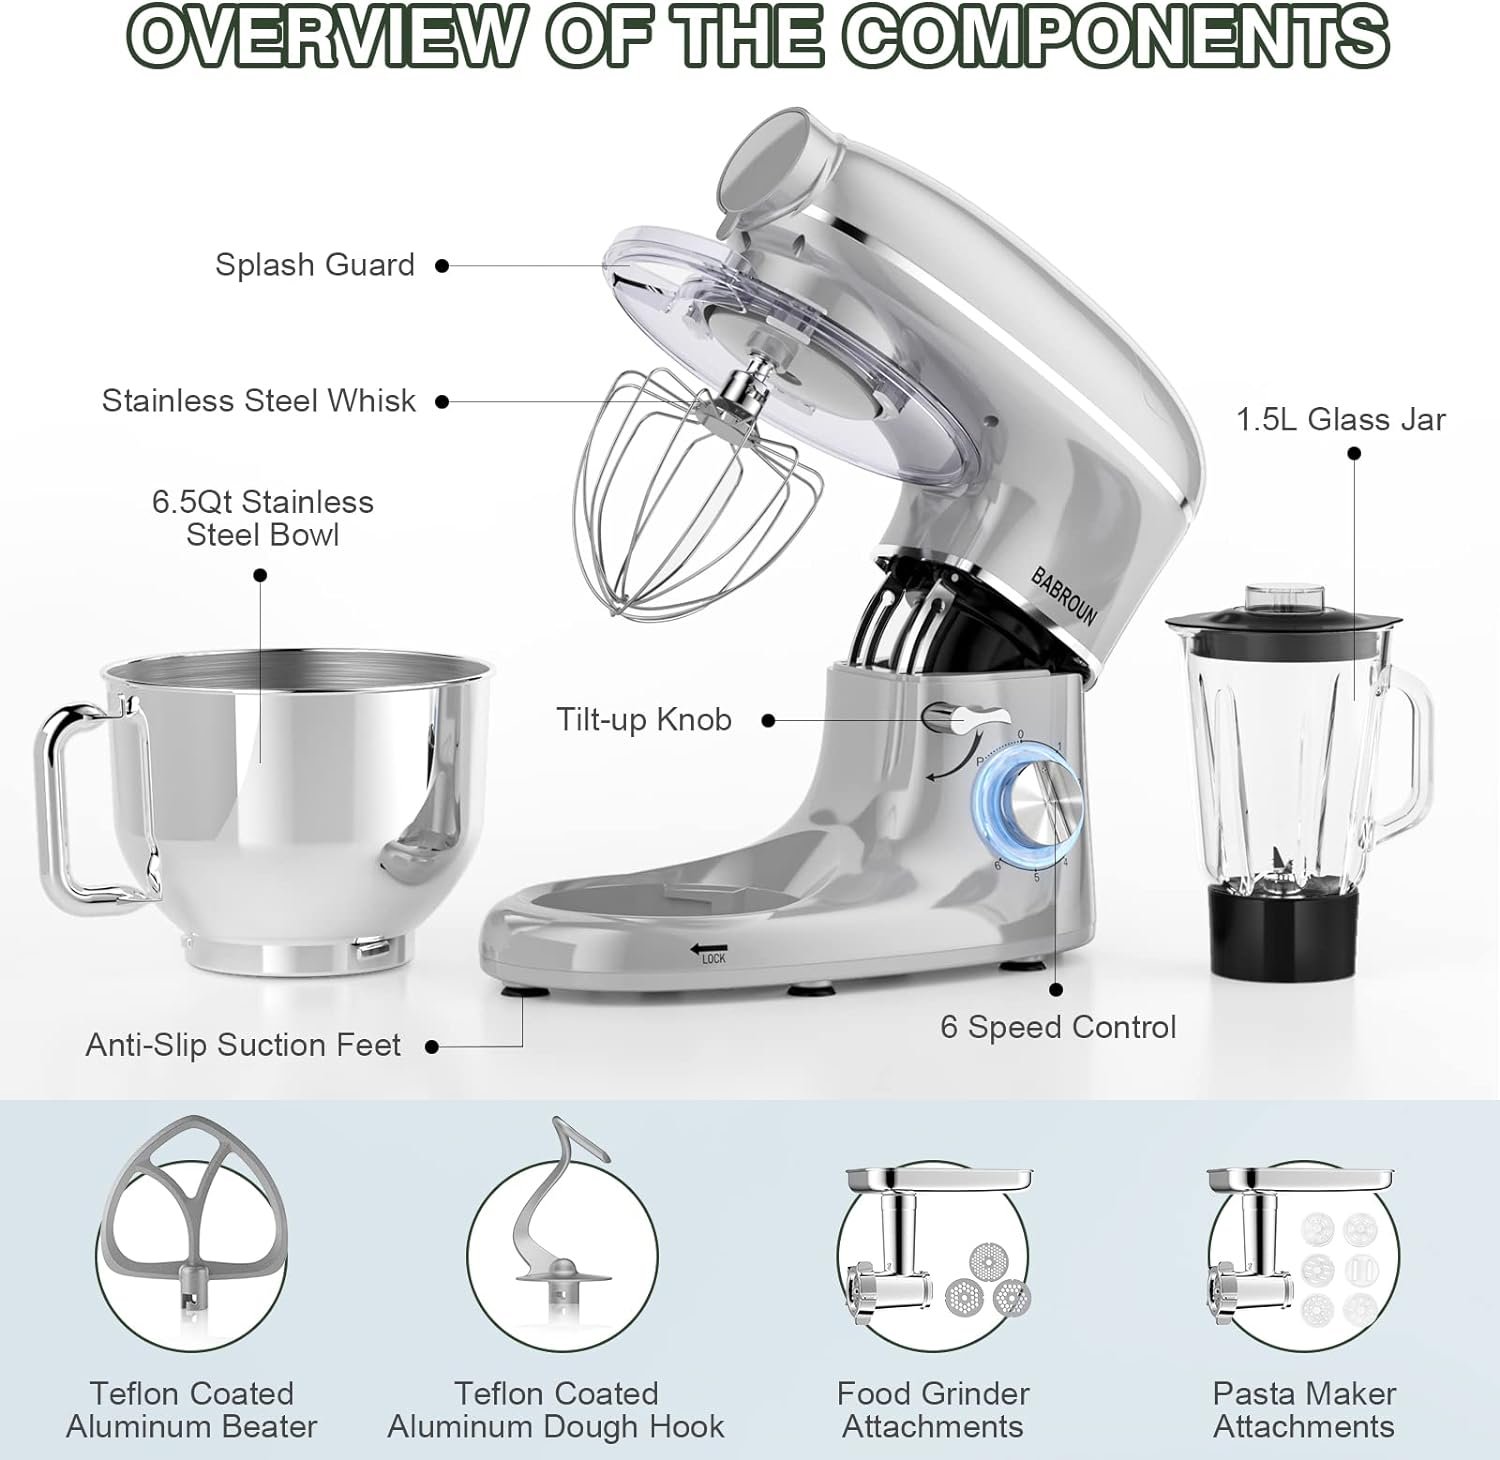 Stand Mixer, BABROUN 6 IN 1 Multifunctional Electric Kitchen Mixer with 6.5QT Stainless Steel Bowl, 1.5L Glass Jar, Meat Grinder, Dough Hook, Whisk, Beater, 6 Speeds Food Mixer for Baking Mixing